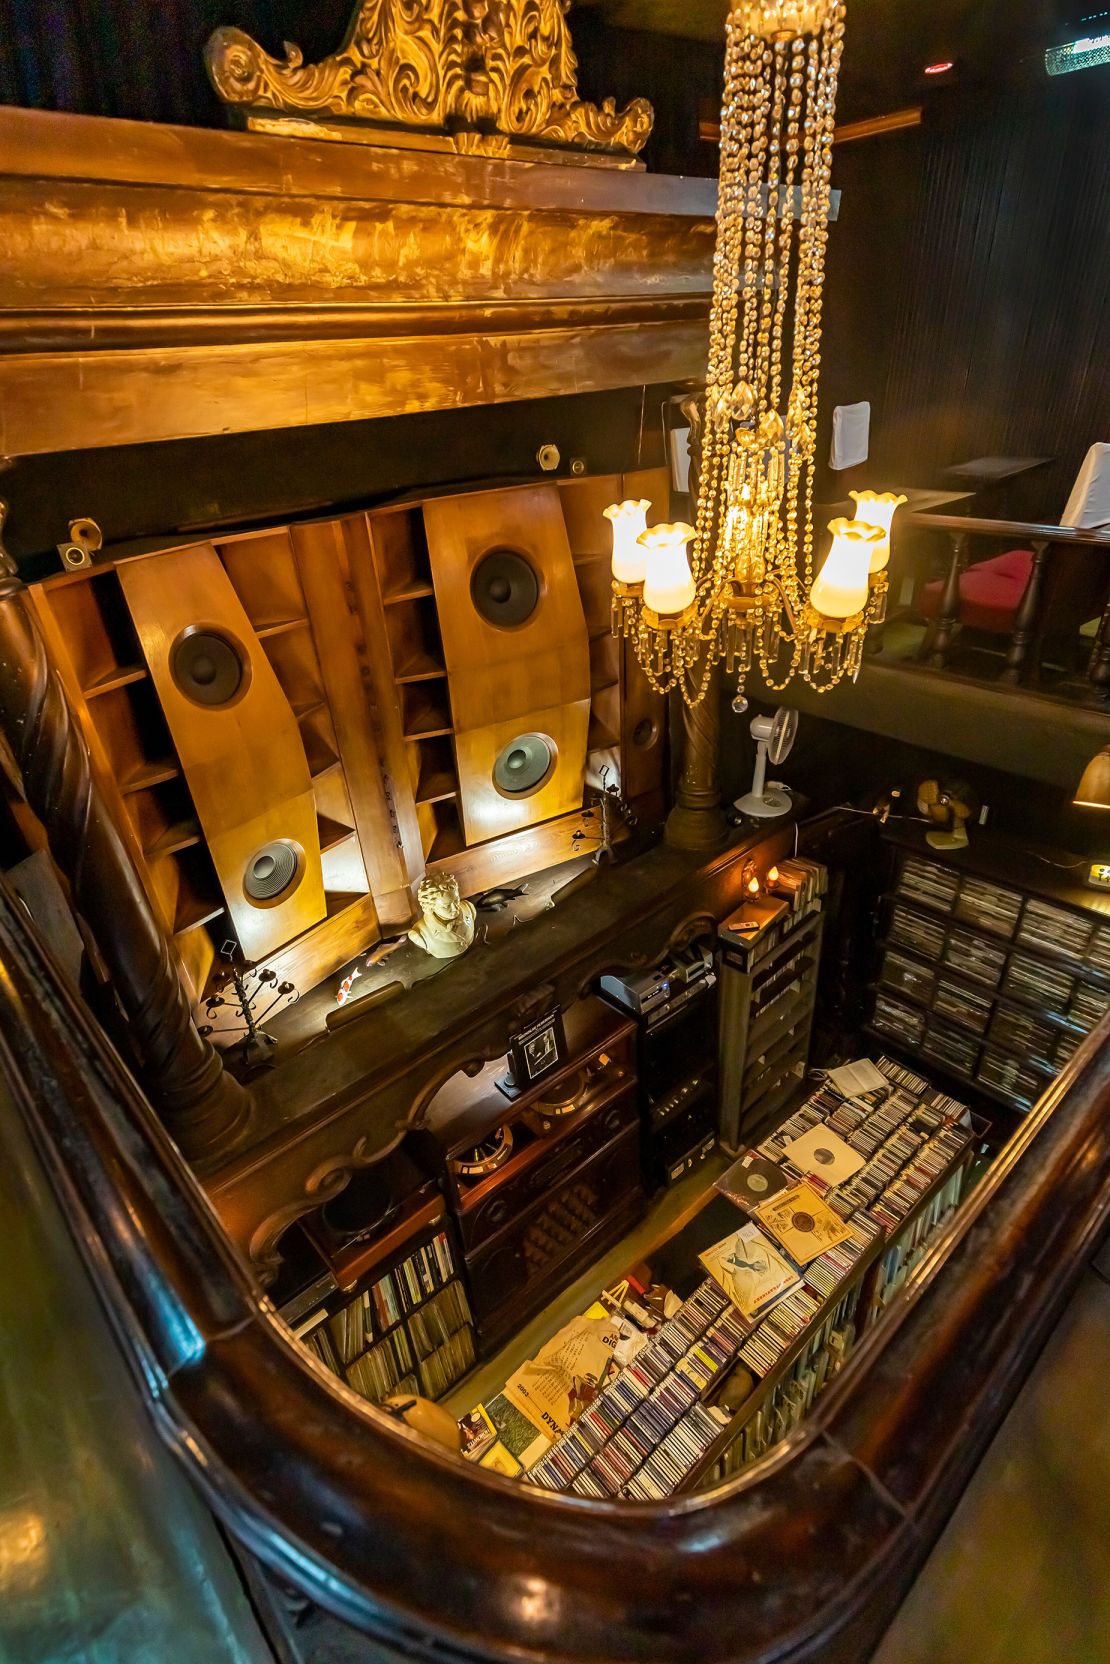 The cafe has more than 10,000 classical music CDs and records.